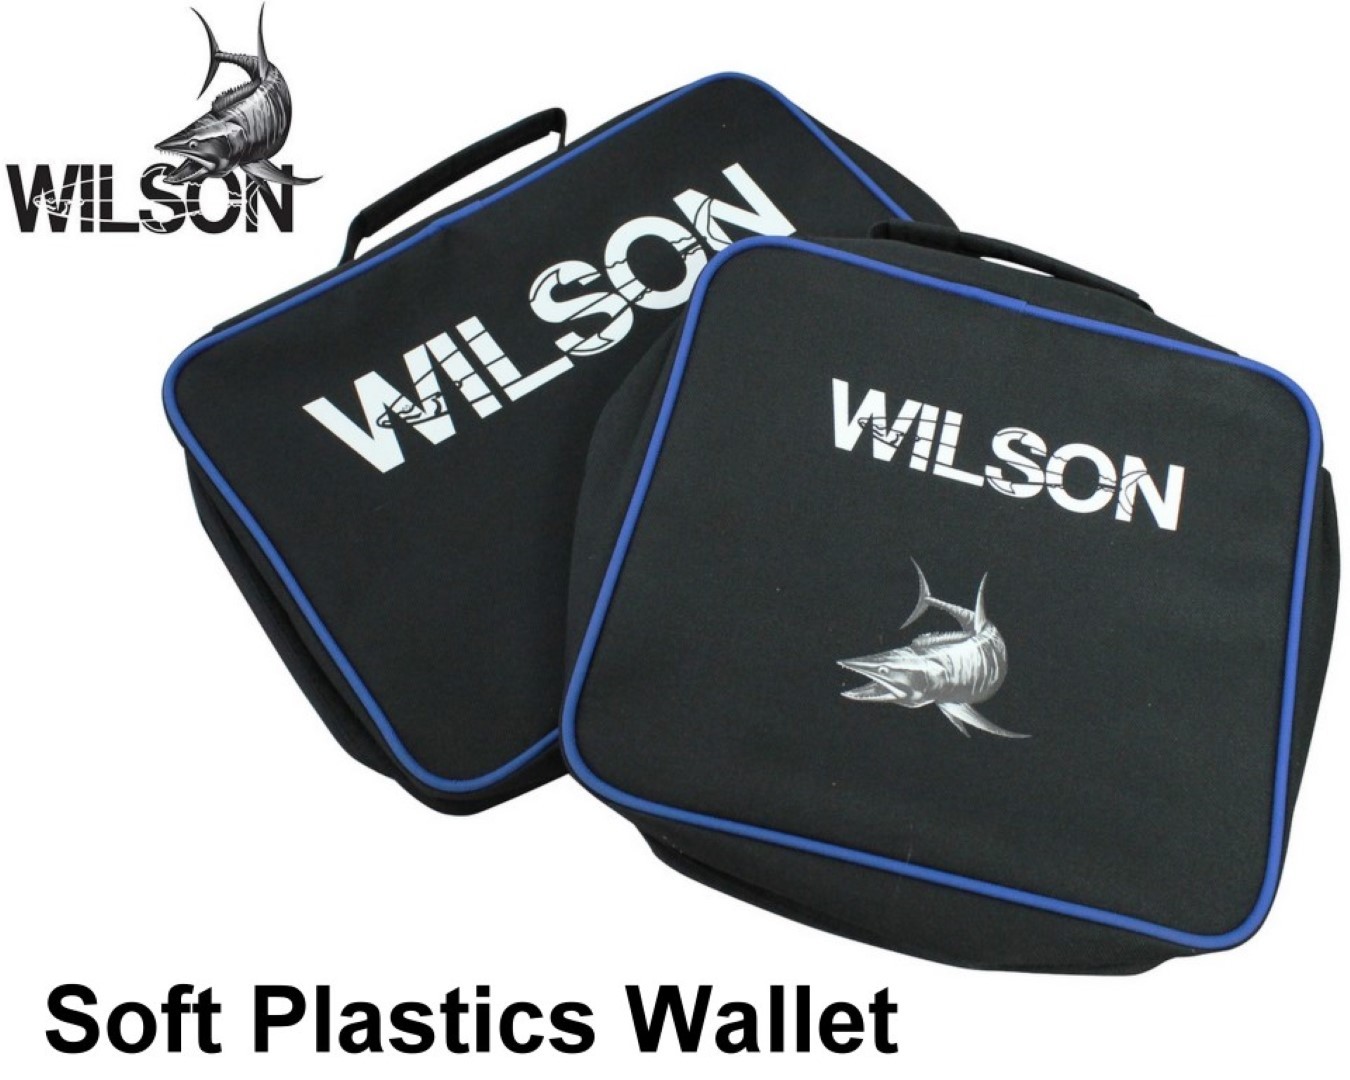 1 x Wilson Fishing Lure Wallet - Soft Plastics Wallet-Large or